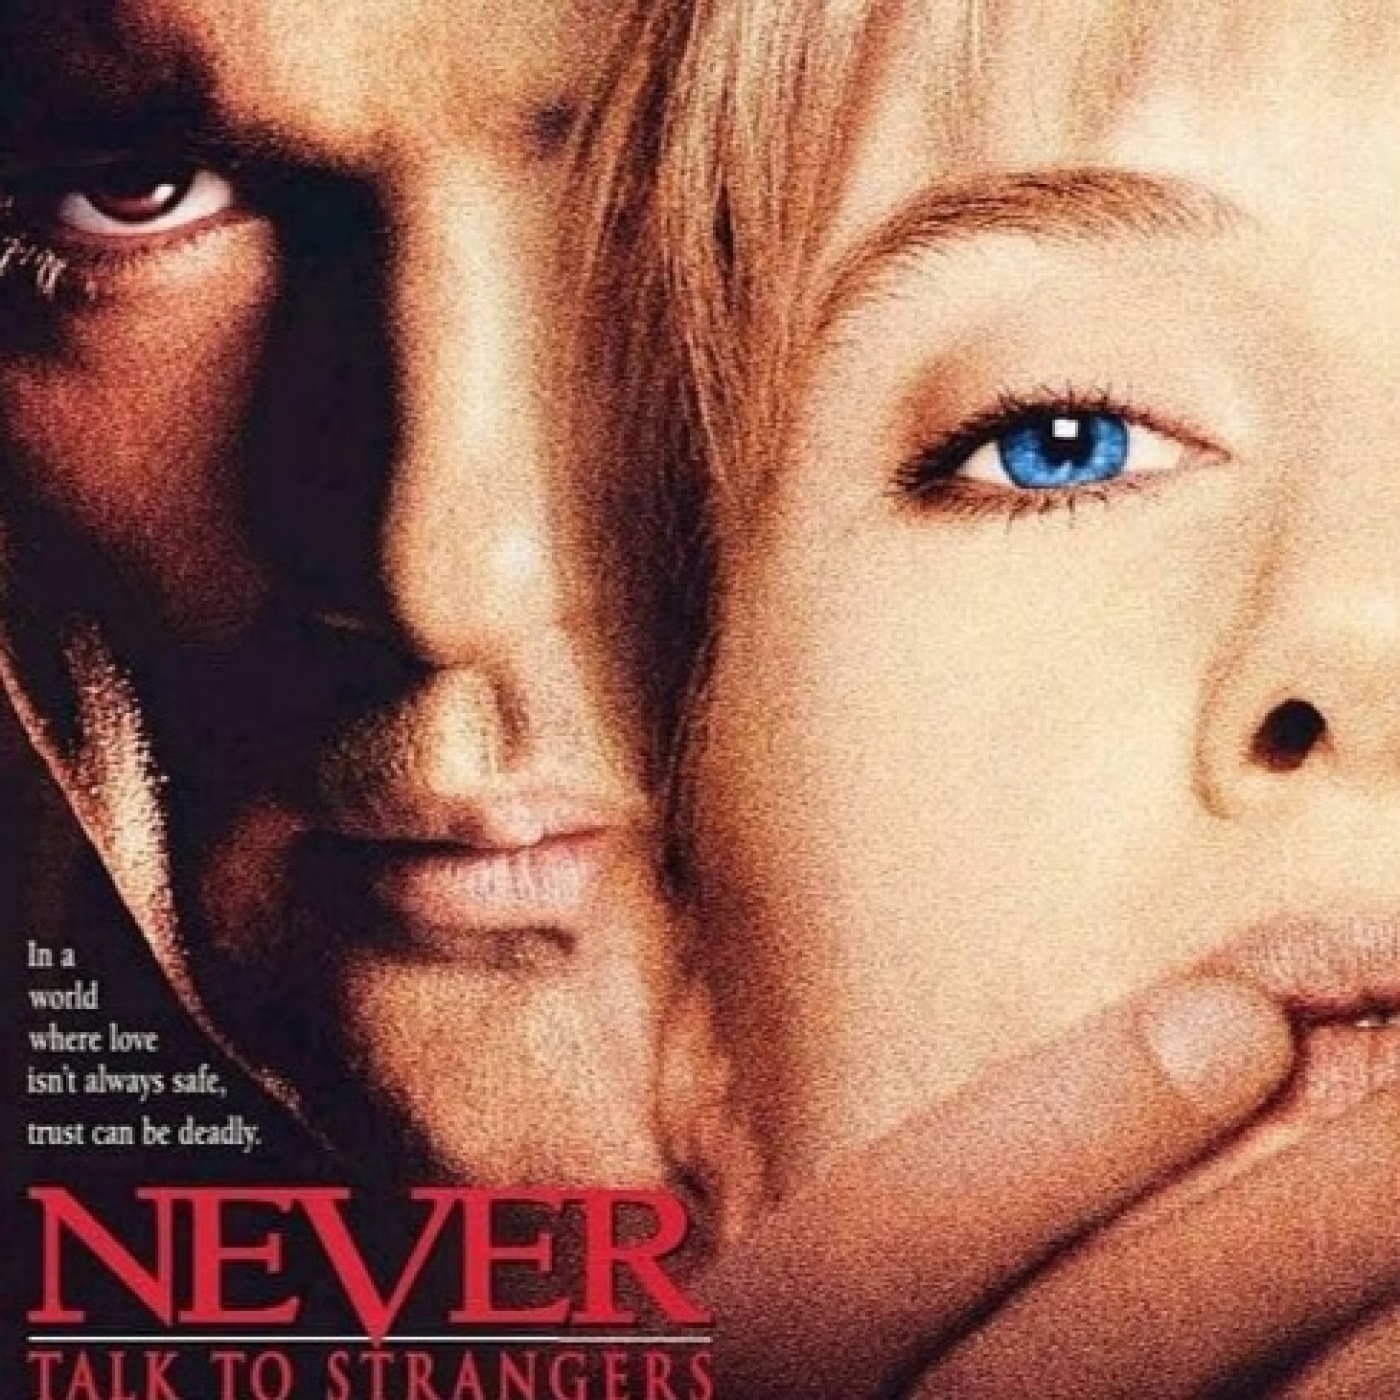 Movies Requests - Never Talk to Strangers - 1995